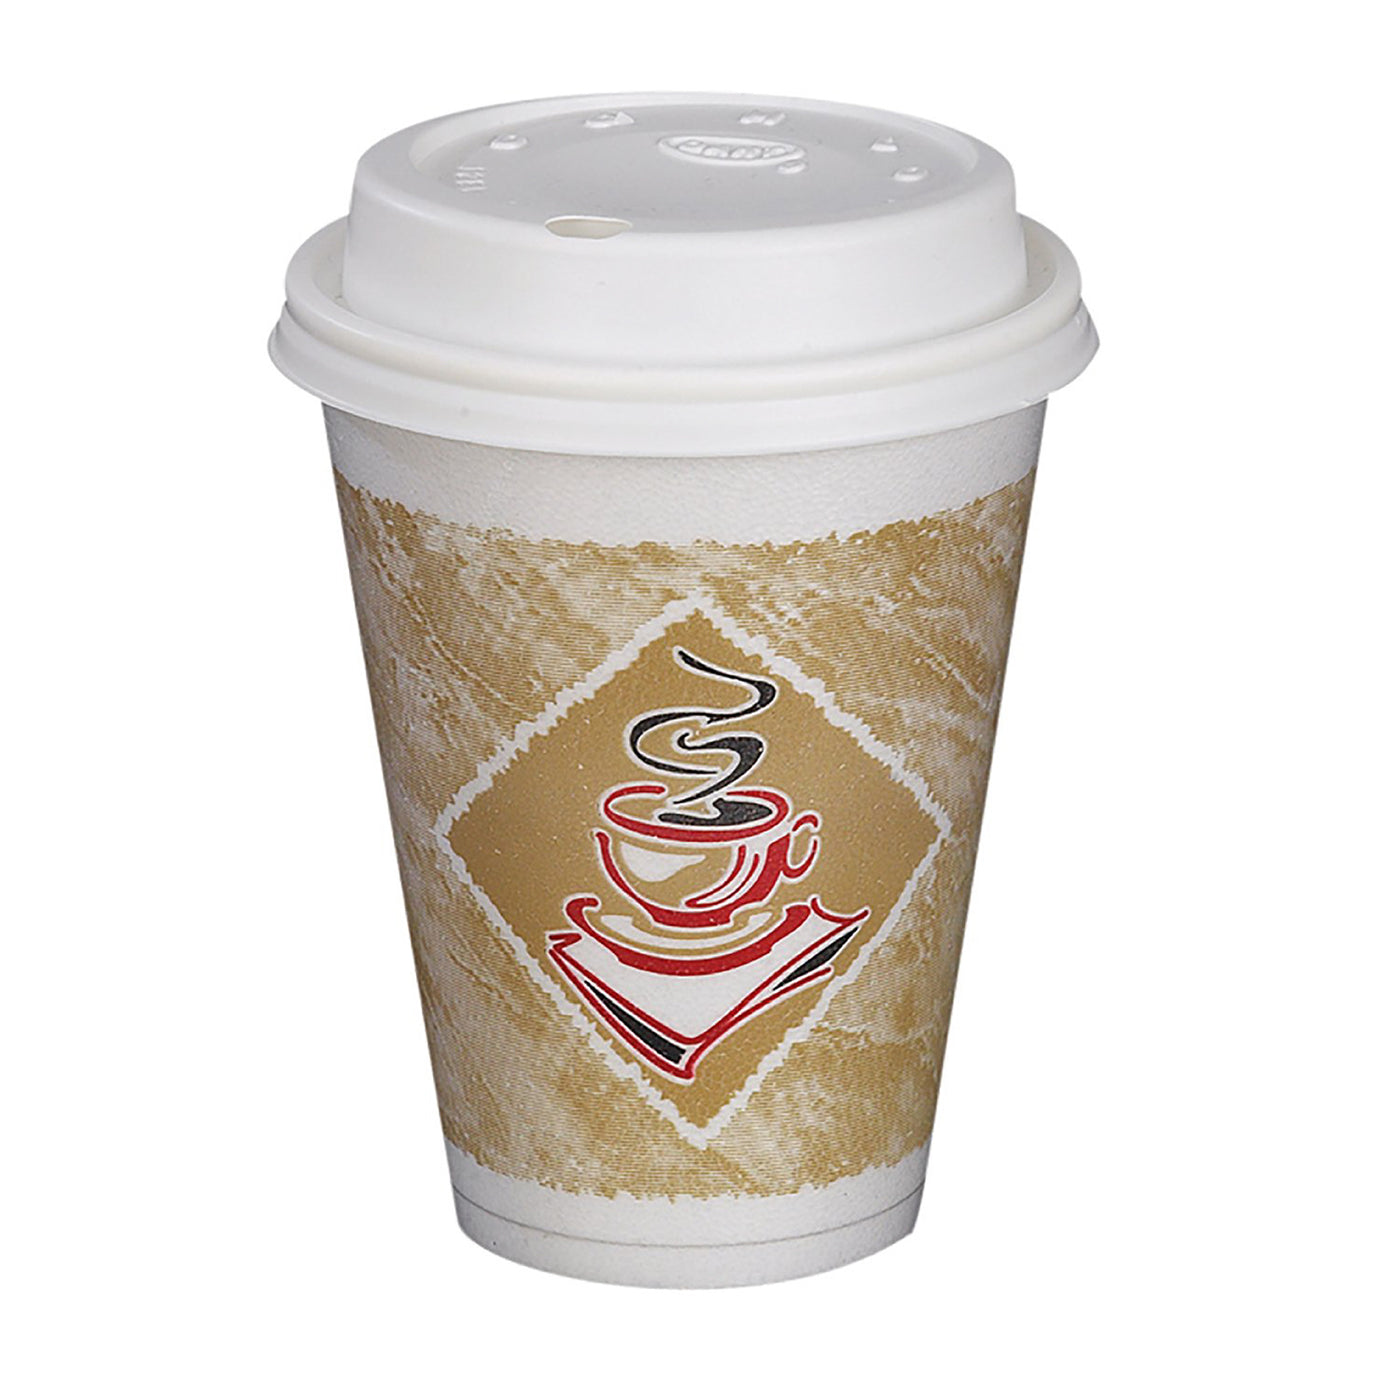 Choice 8 oz. Tall White Poly Paper Hot Cup - 1000/Case